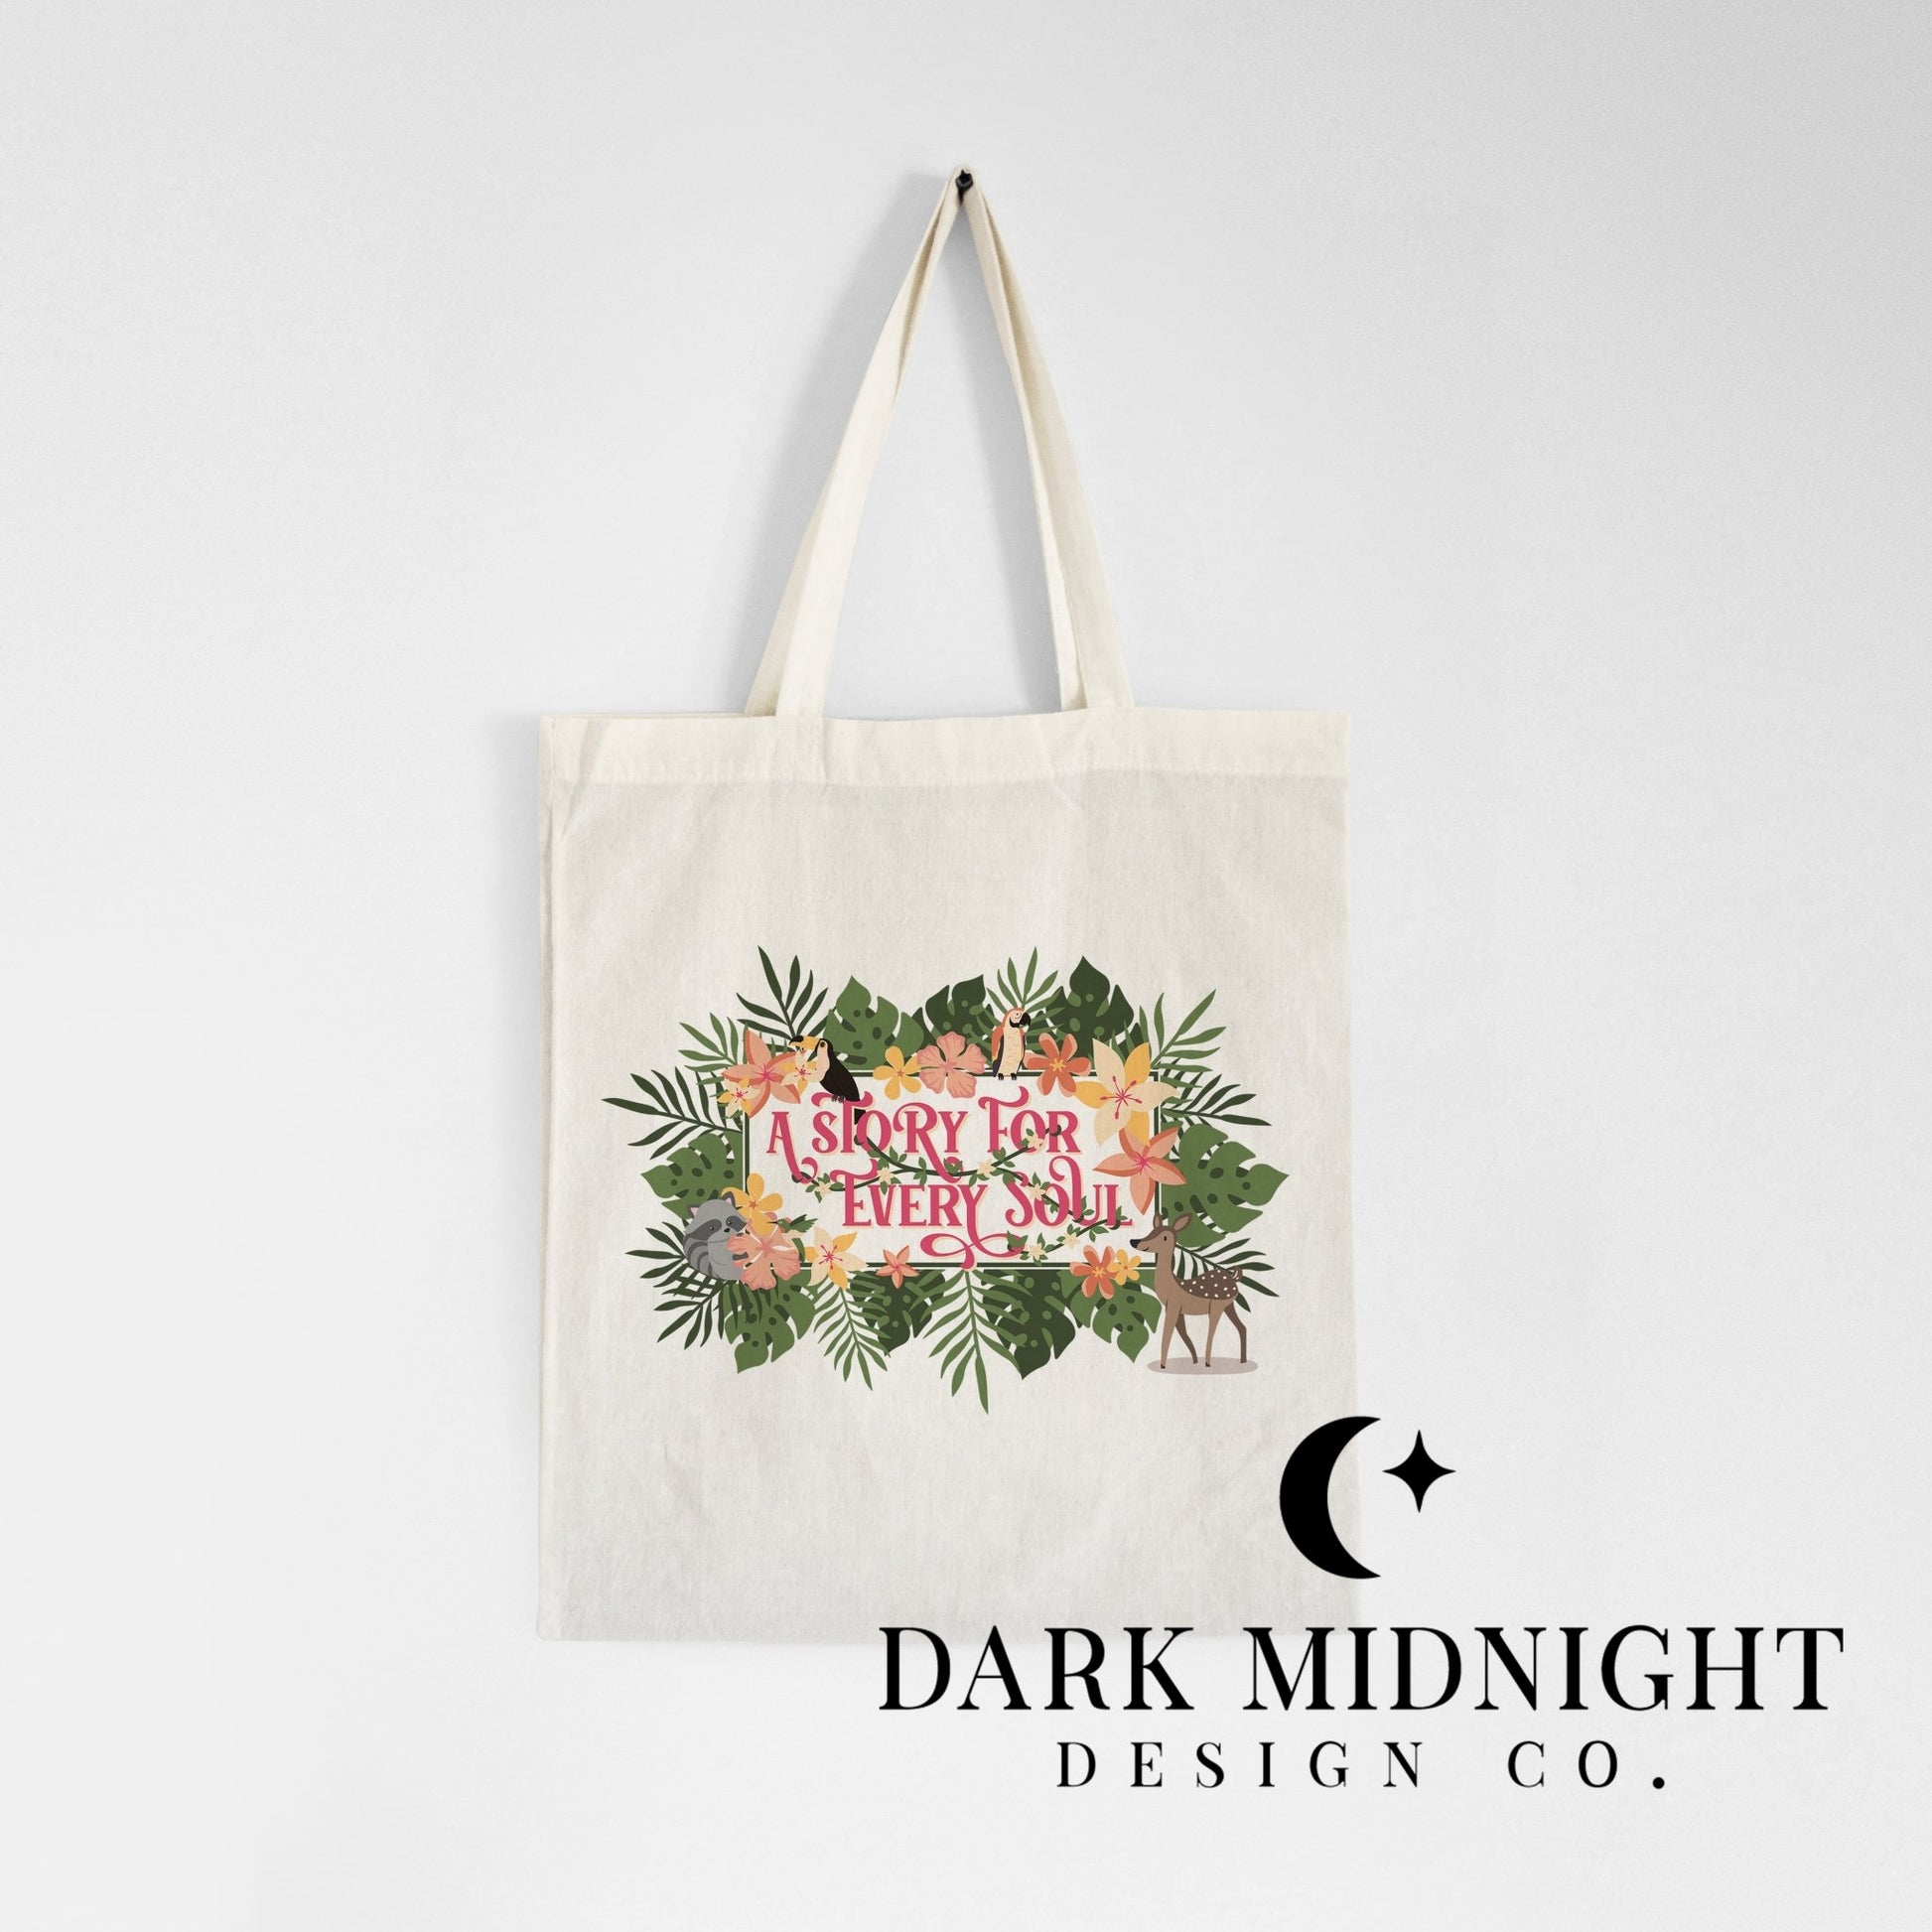 Pemberley Books Mural Tote - Officially Licensed Queen's Cove Series - Dark Midnight Design Co